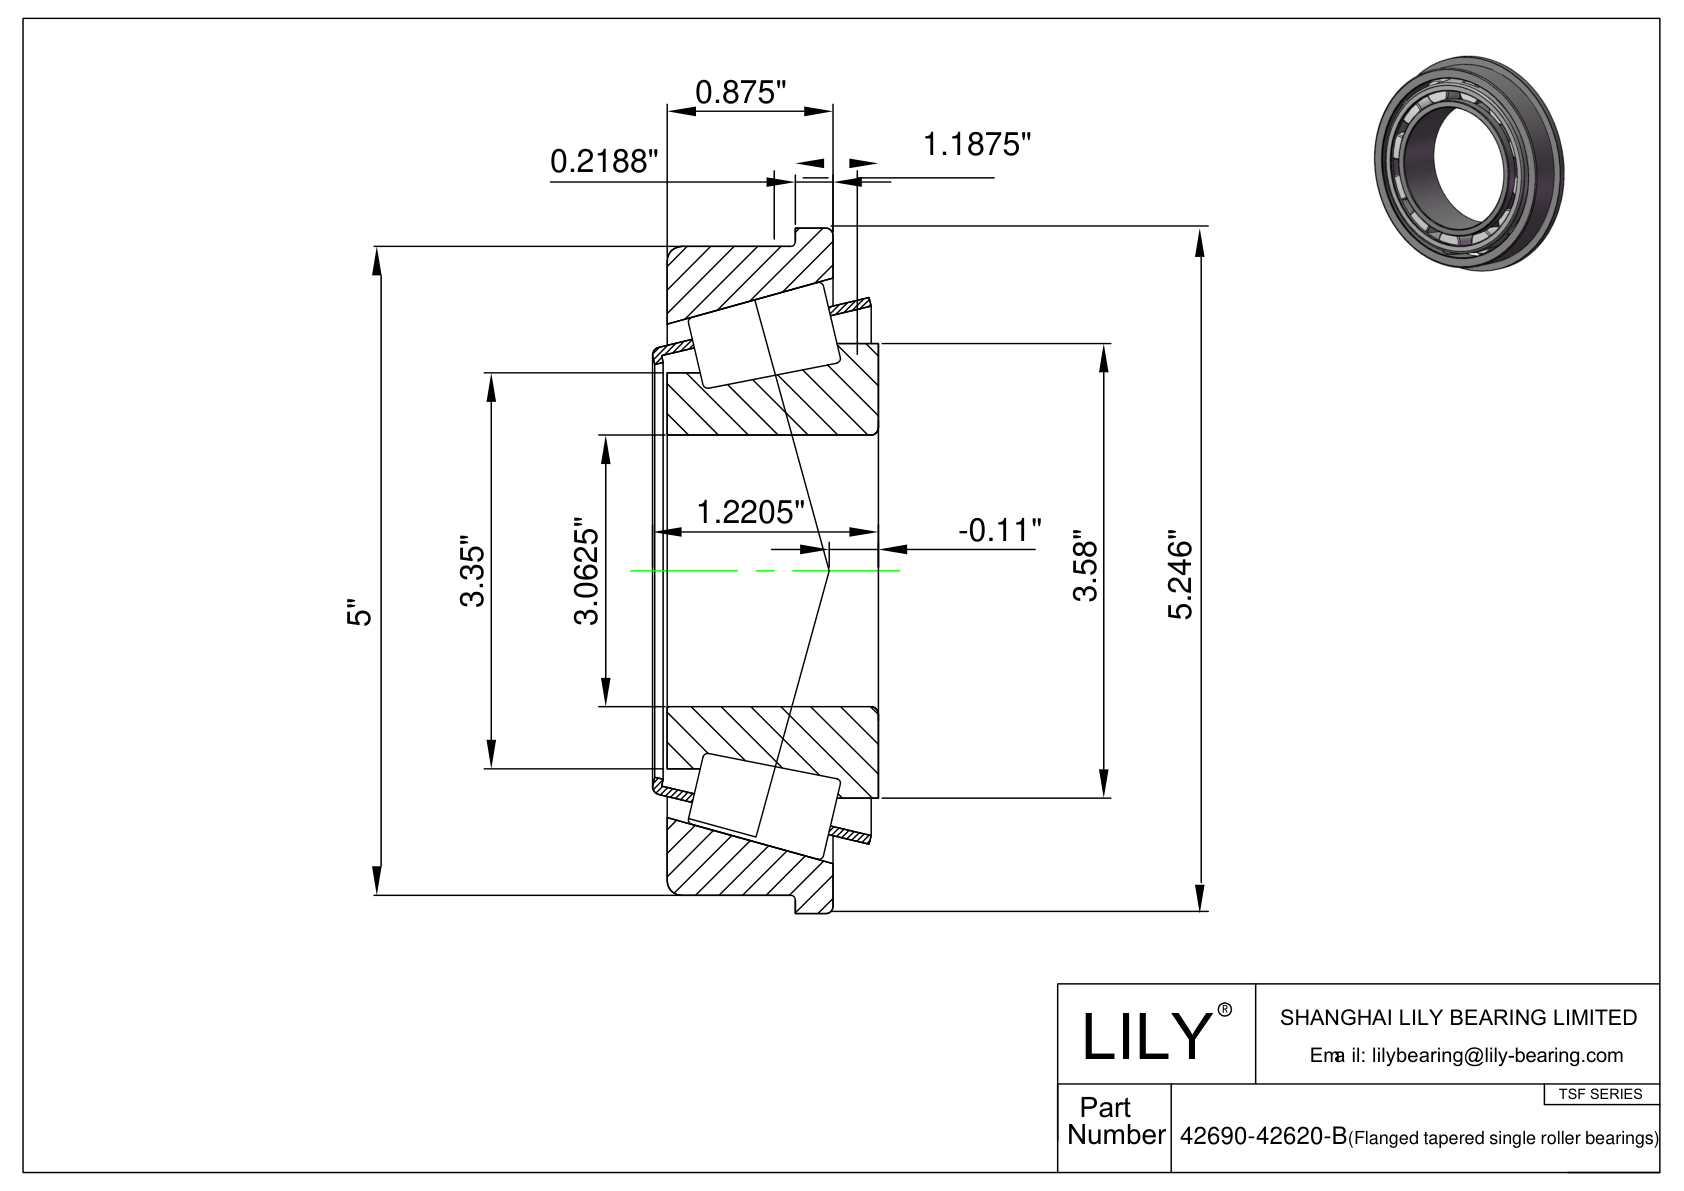 42690-42620-B TSF (Tapered Single Roller Bearings with Flange) (Imperial) cad drawing